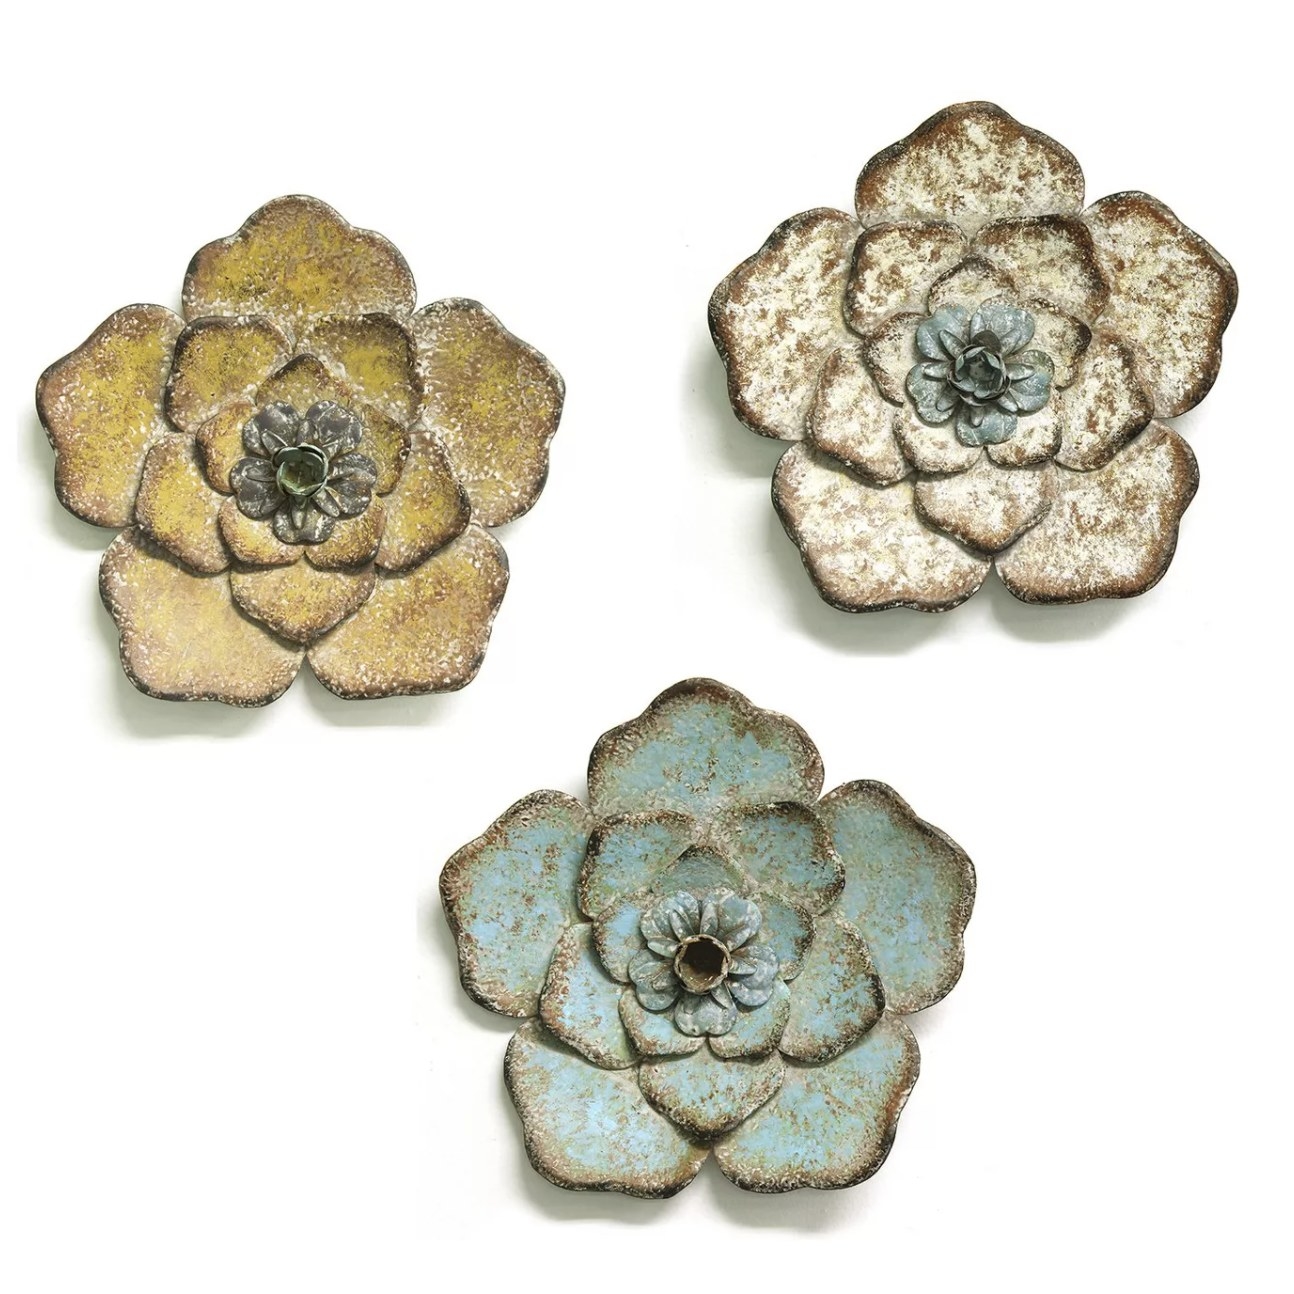 The three metal rustic flower wall decor pieces